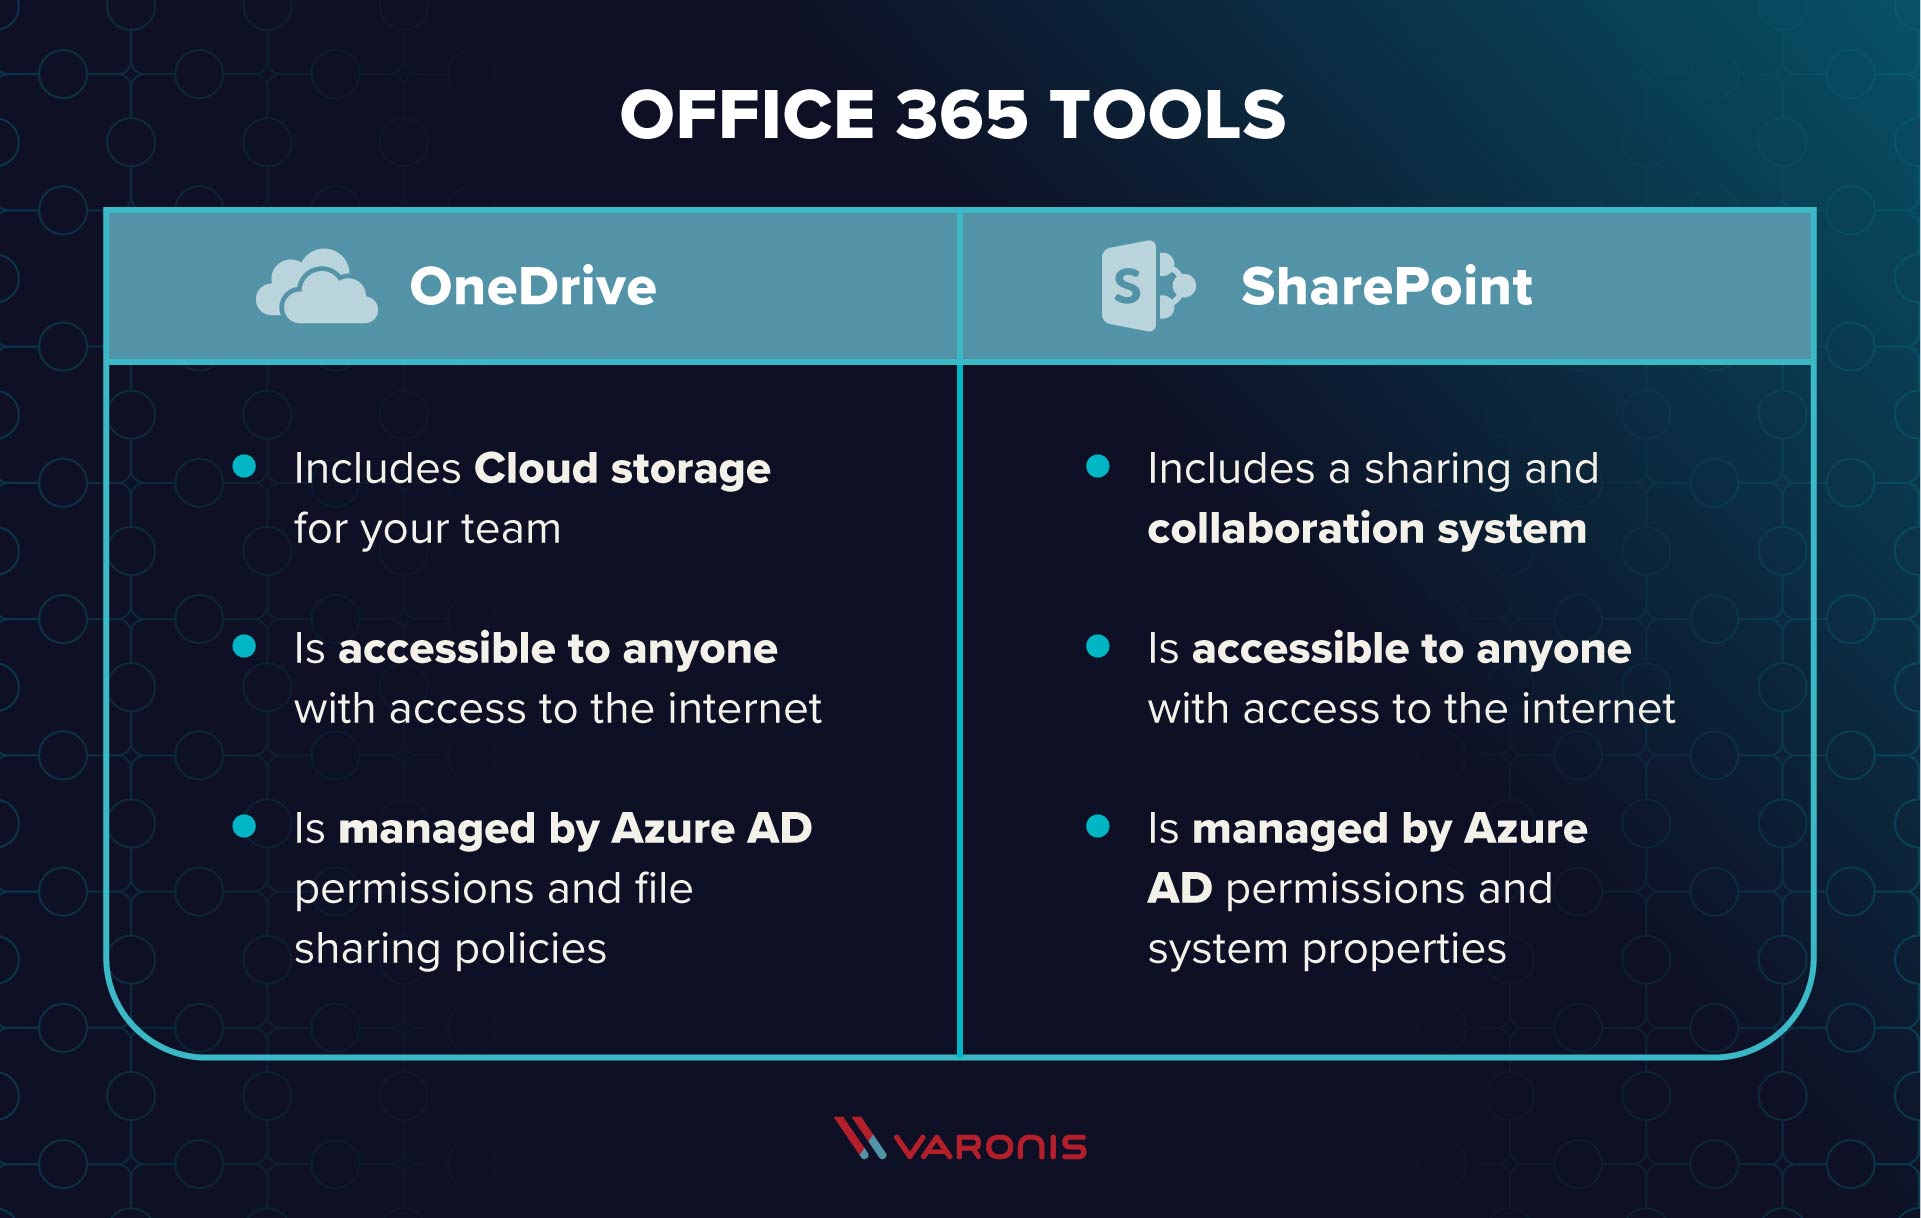 Microsoft Office 365 File Sharing Guide: OneDrive and SharePoint Tips